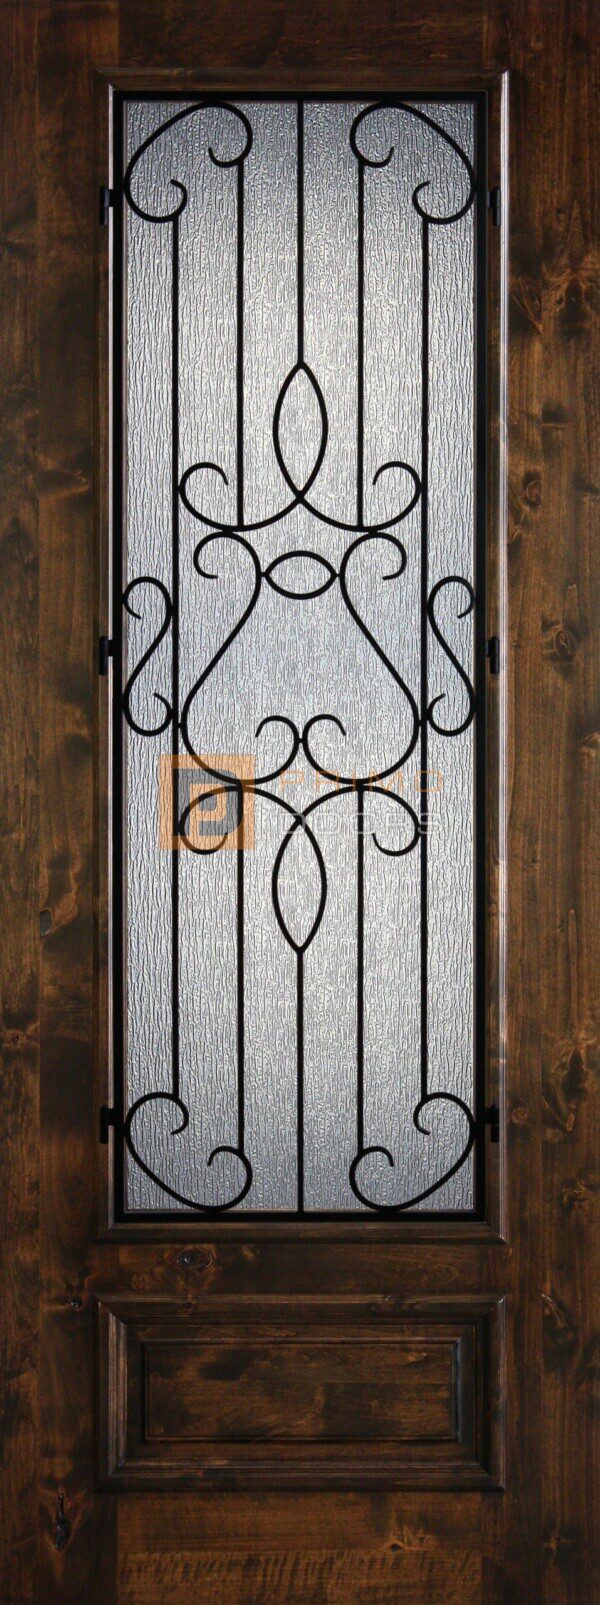 8' 3/4 Lite Knotty Alder Decorative Glass with Iron Grill Single Iron Front Door - PD KA 3080-34 BARC